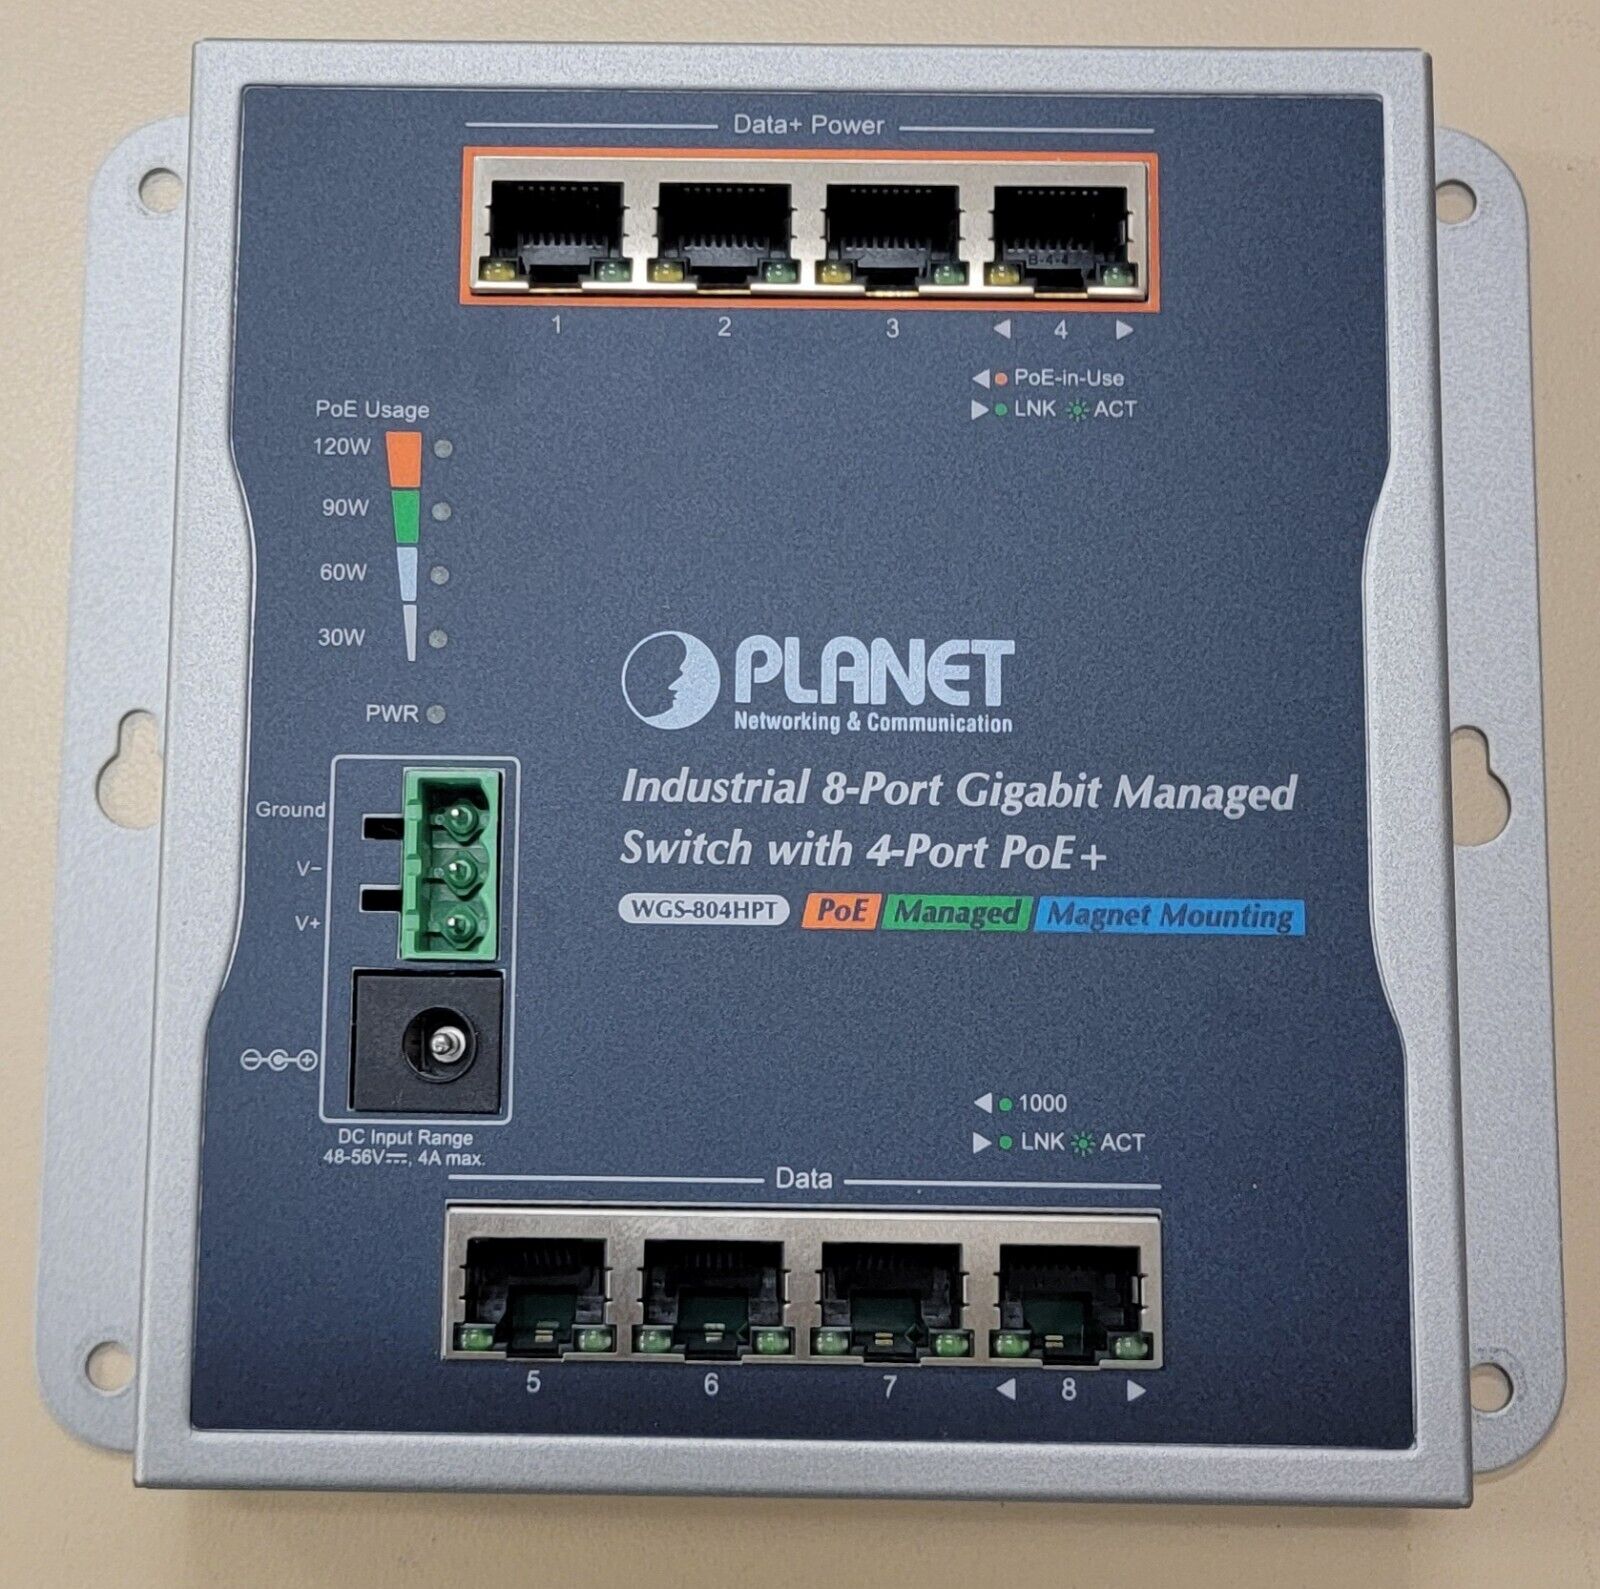  Planet Industrial 8 Port WGS 804HPT